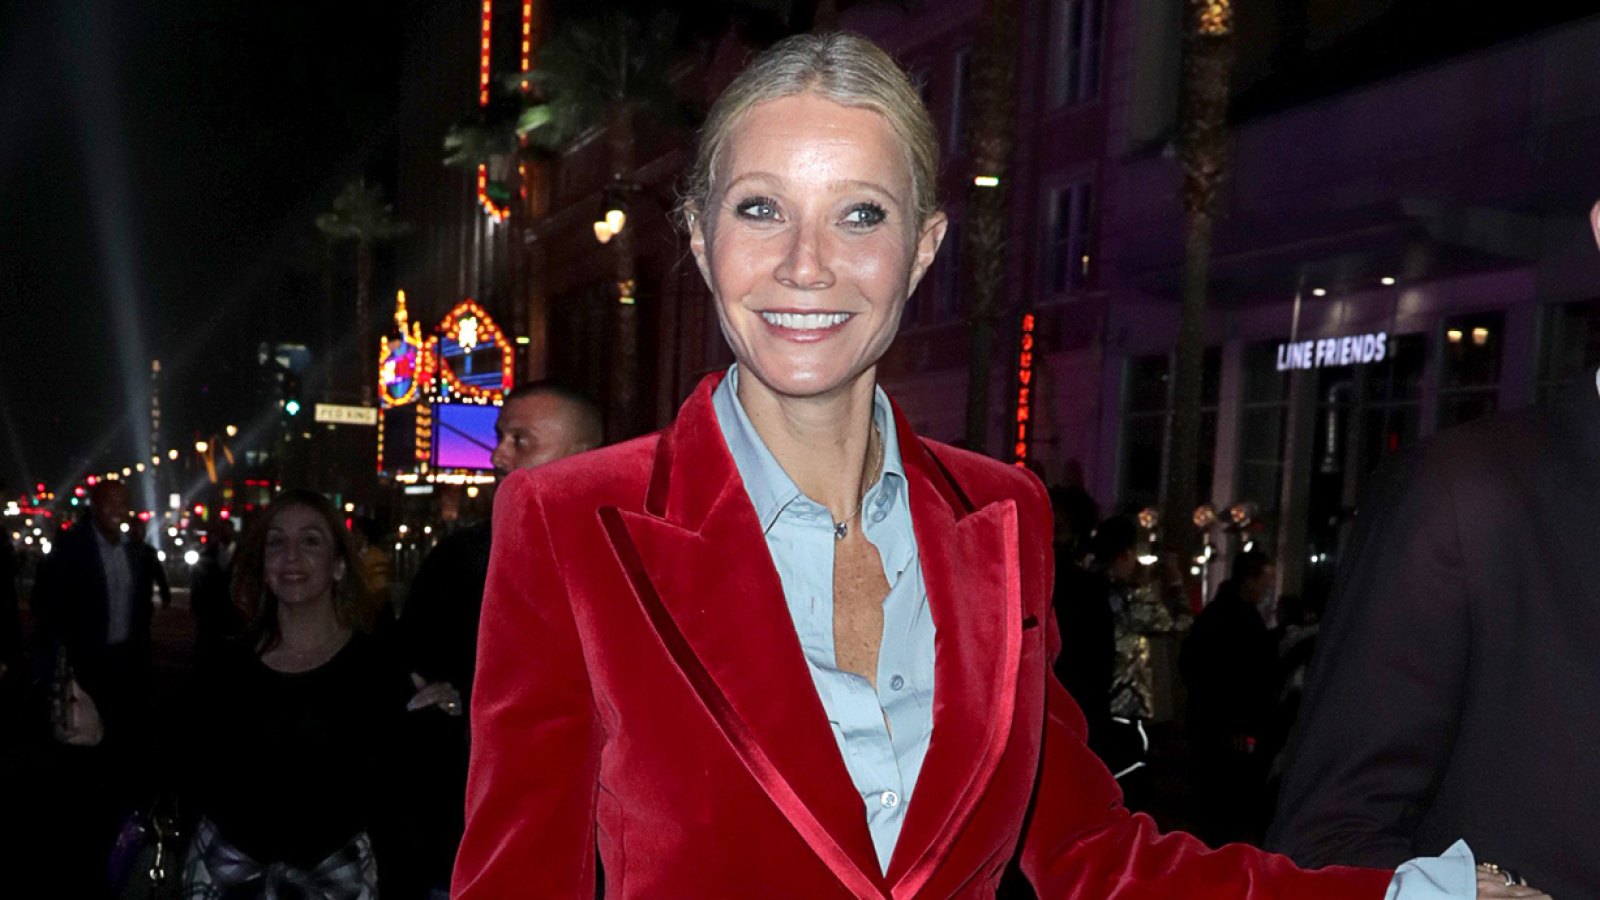 Ultimate Upgrade! Gwyneth Paltrow Rewears Iconic Red Gucci Suit From 1996 VMAs